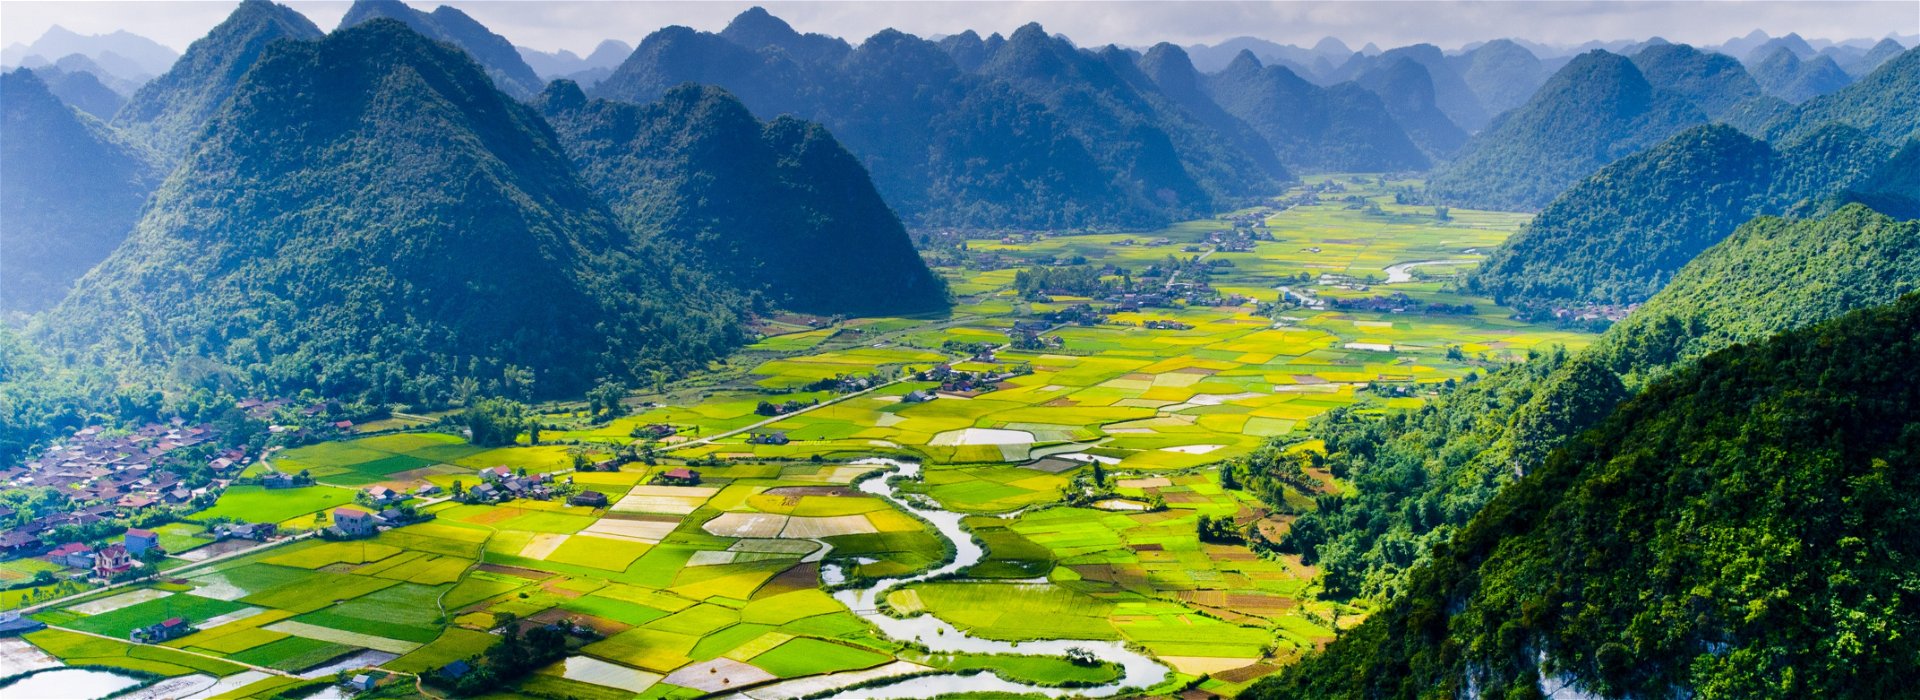 8 Best places to visit in South-East Asia 